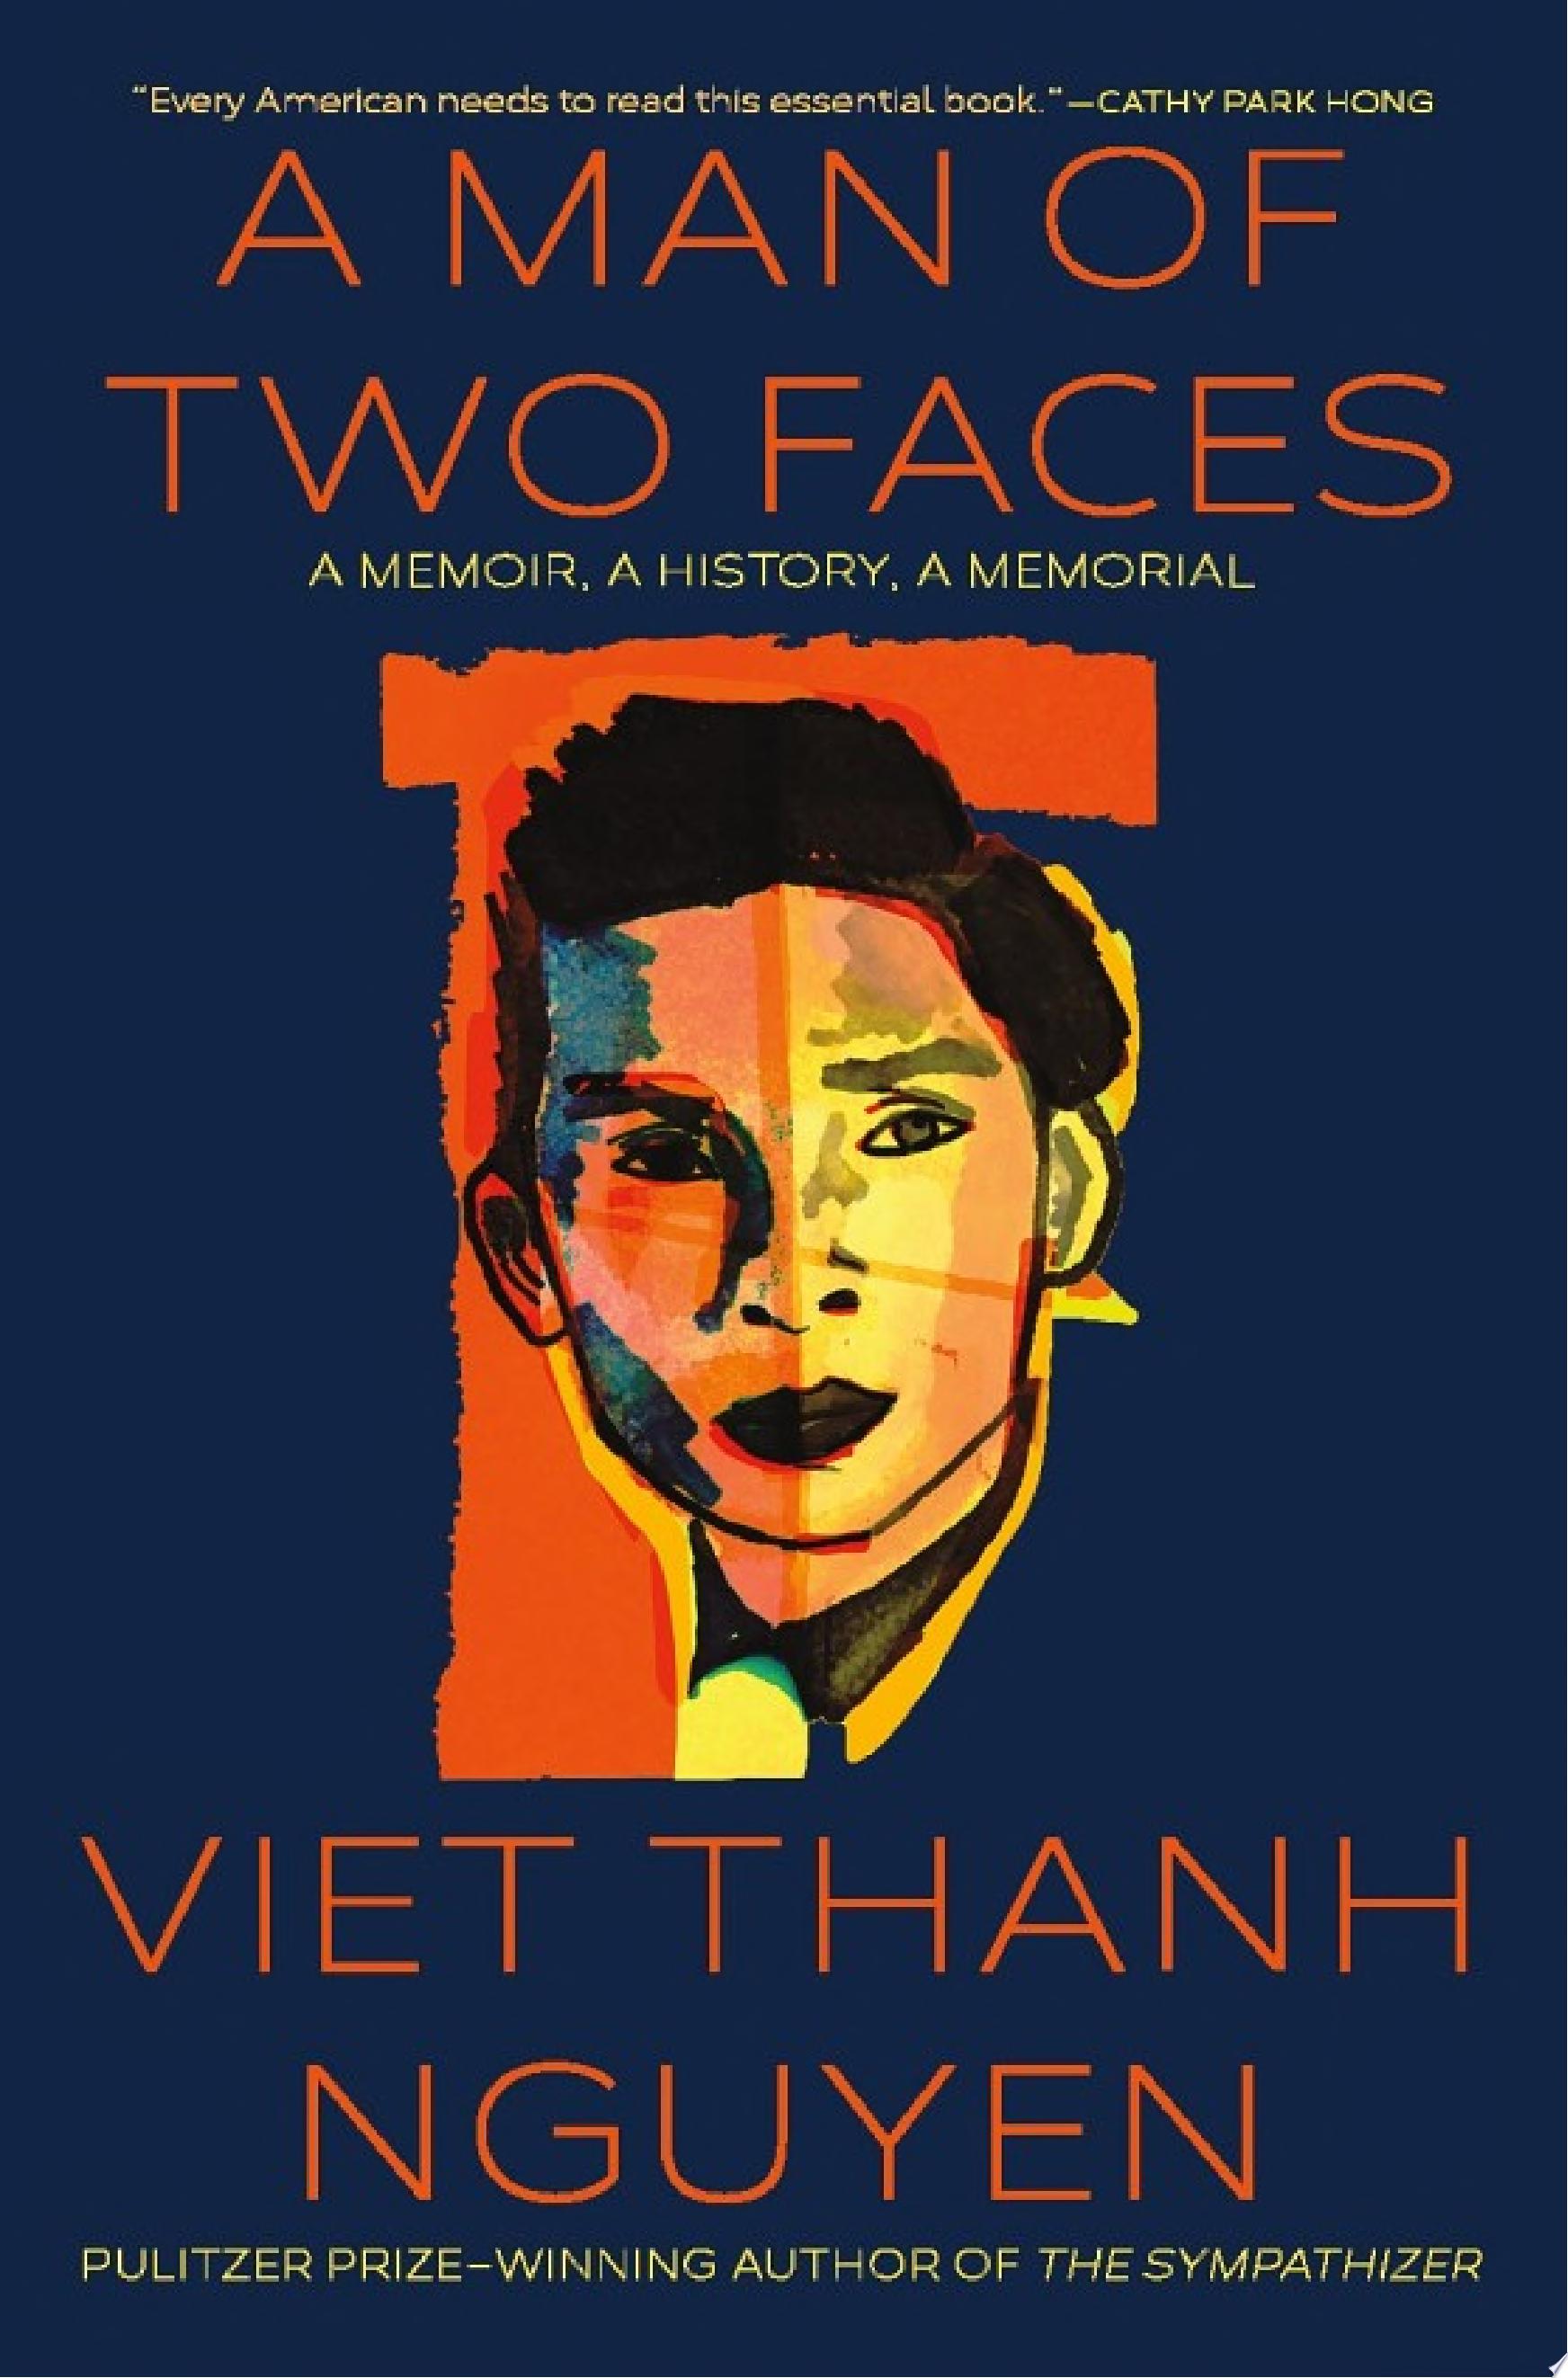 Image for "A Man of Two Faces"